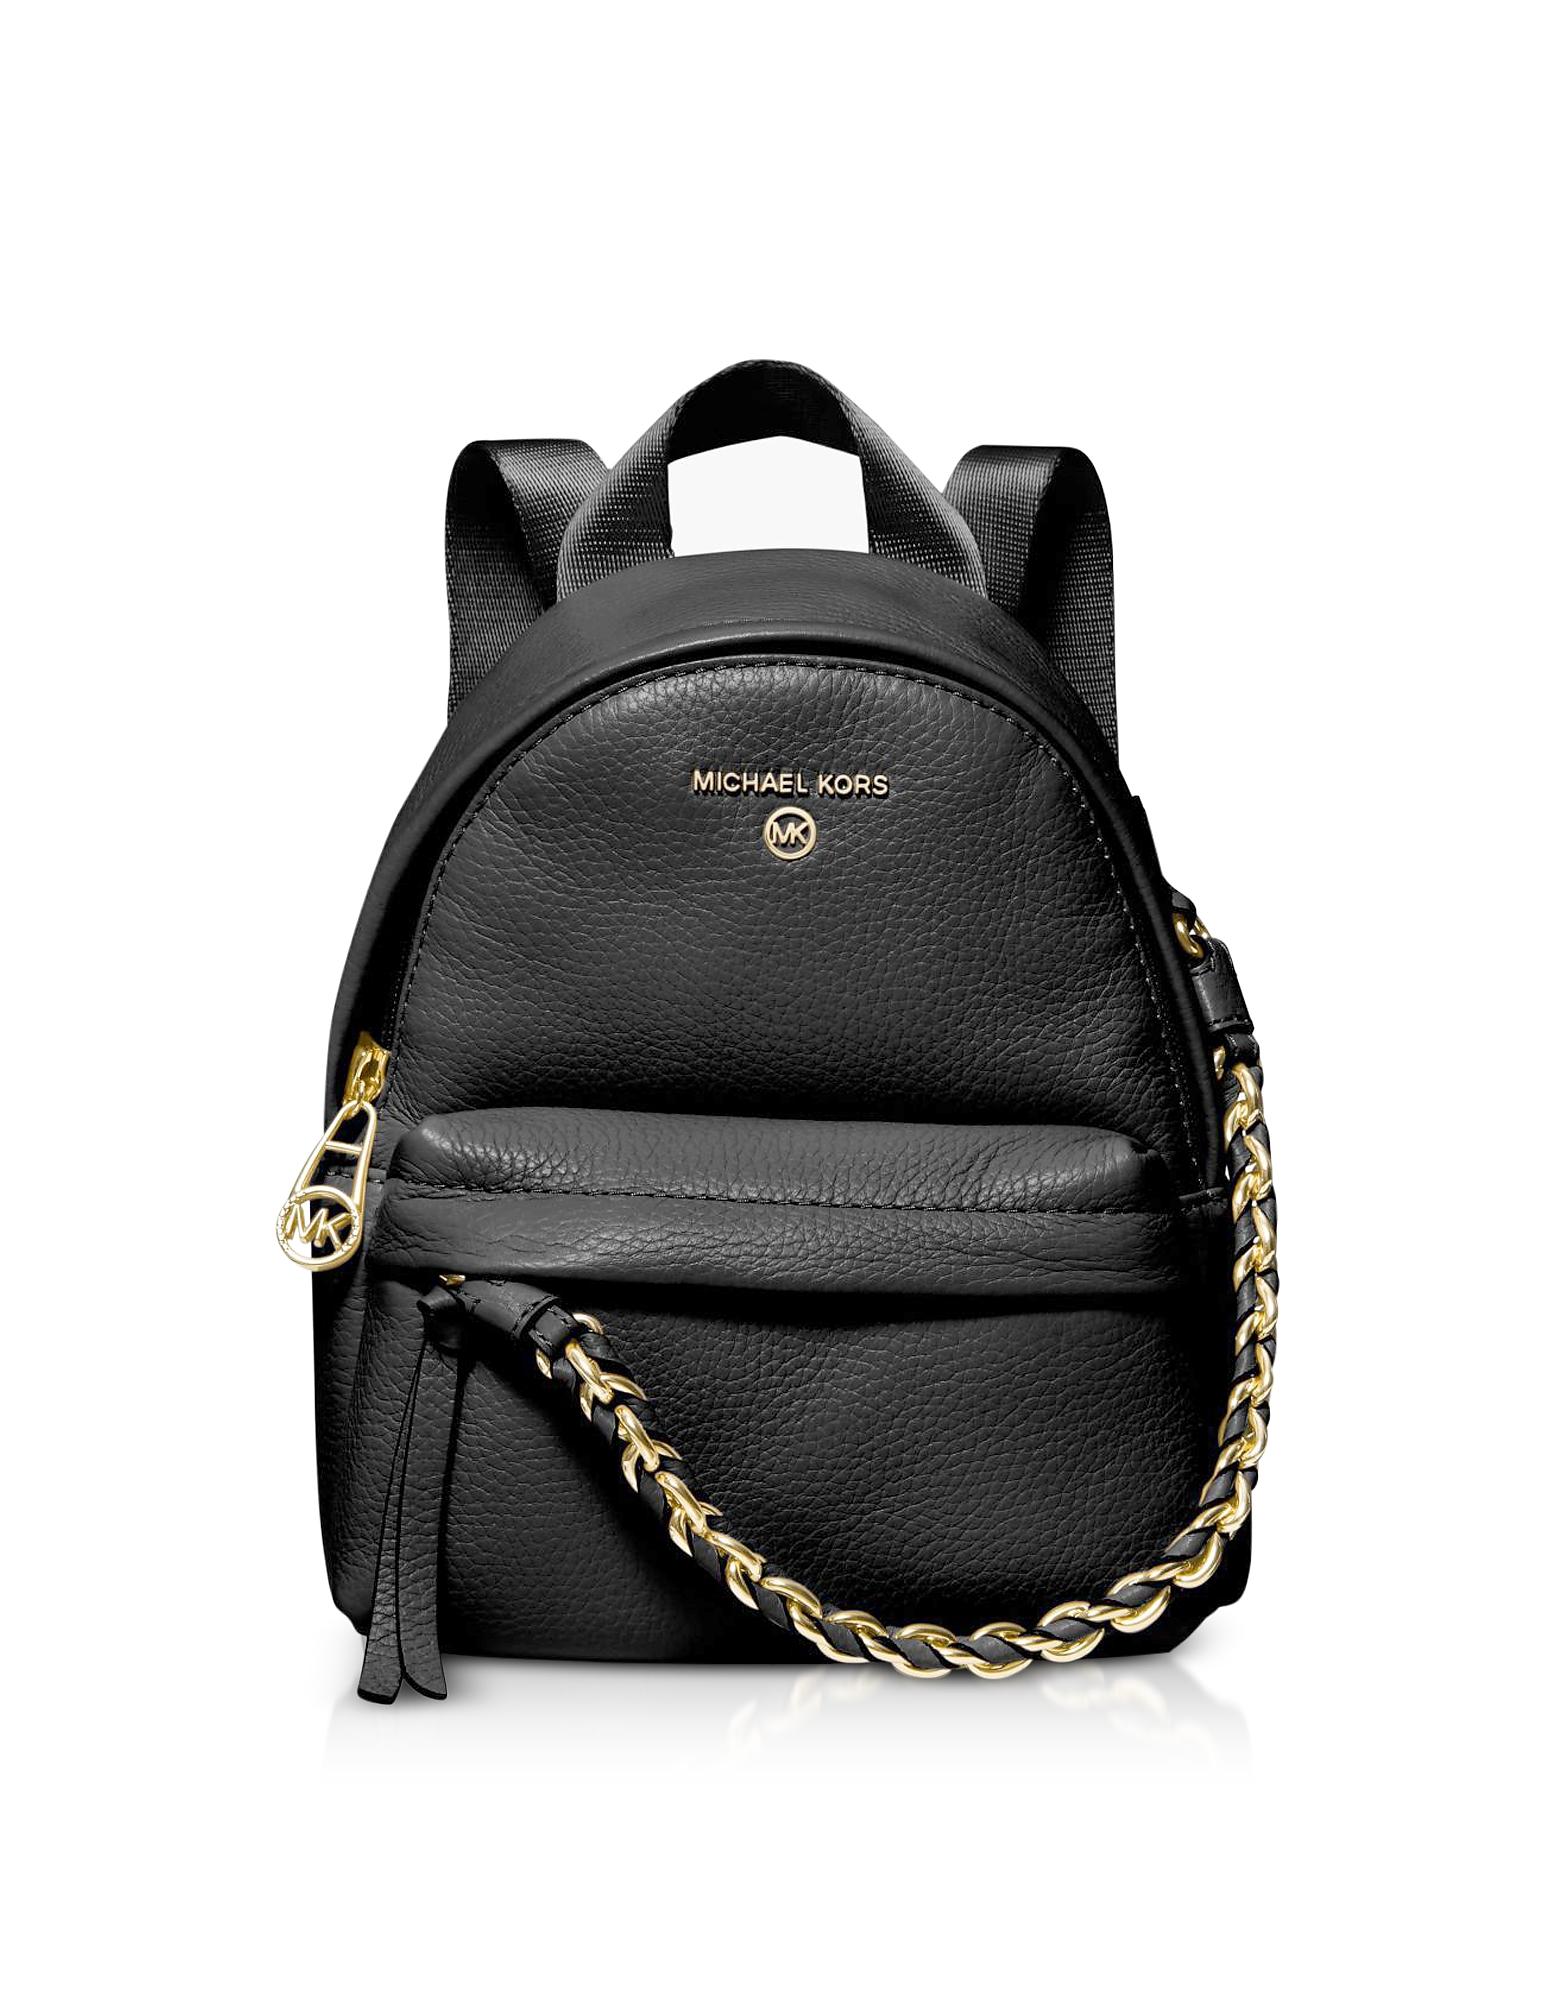 Michael Kors Slater Extra-small Pebbled Leather Convertible Backpack in ...